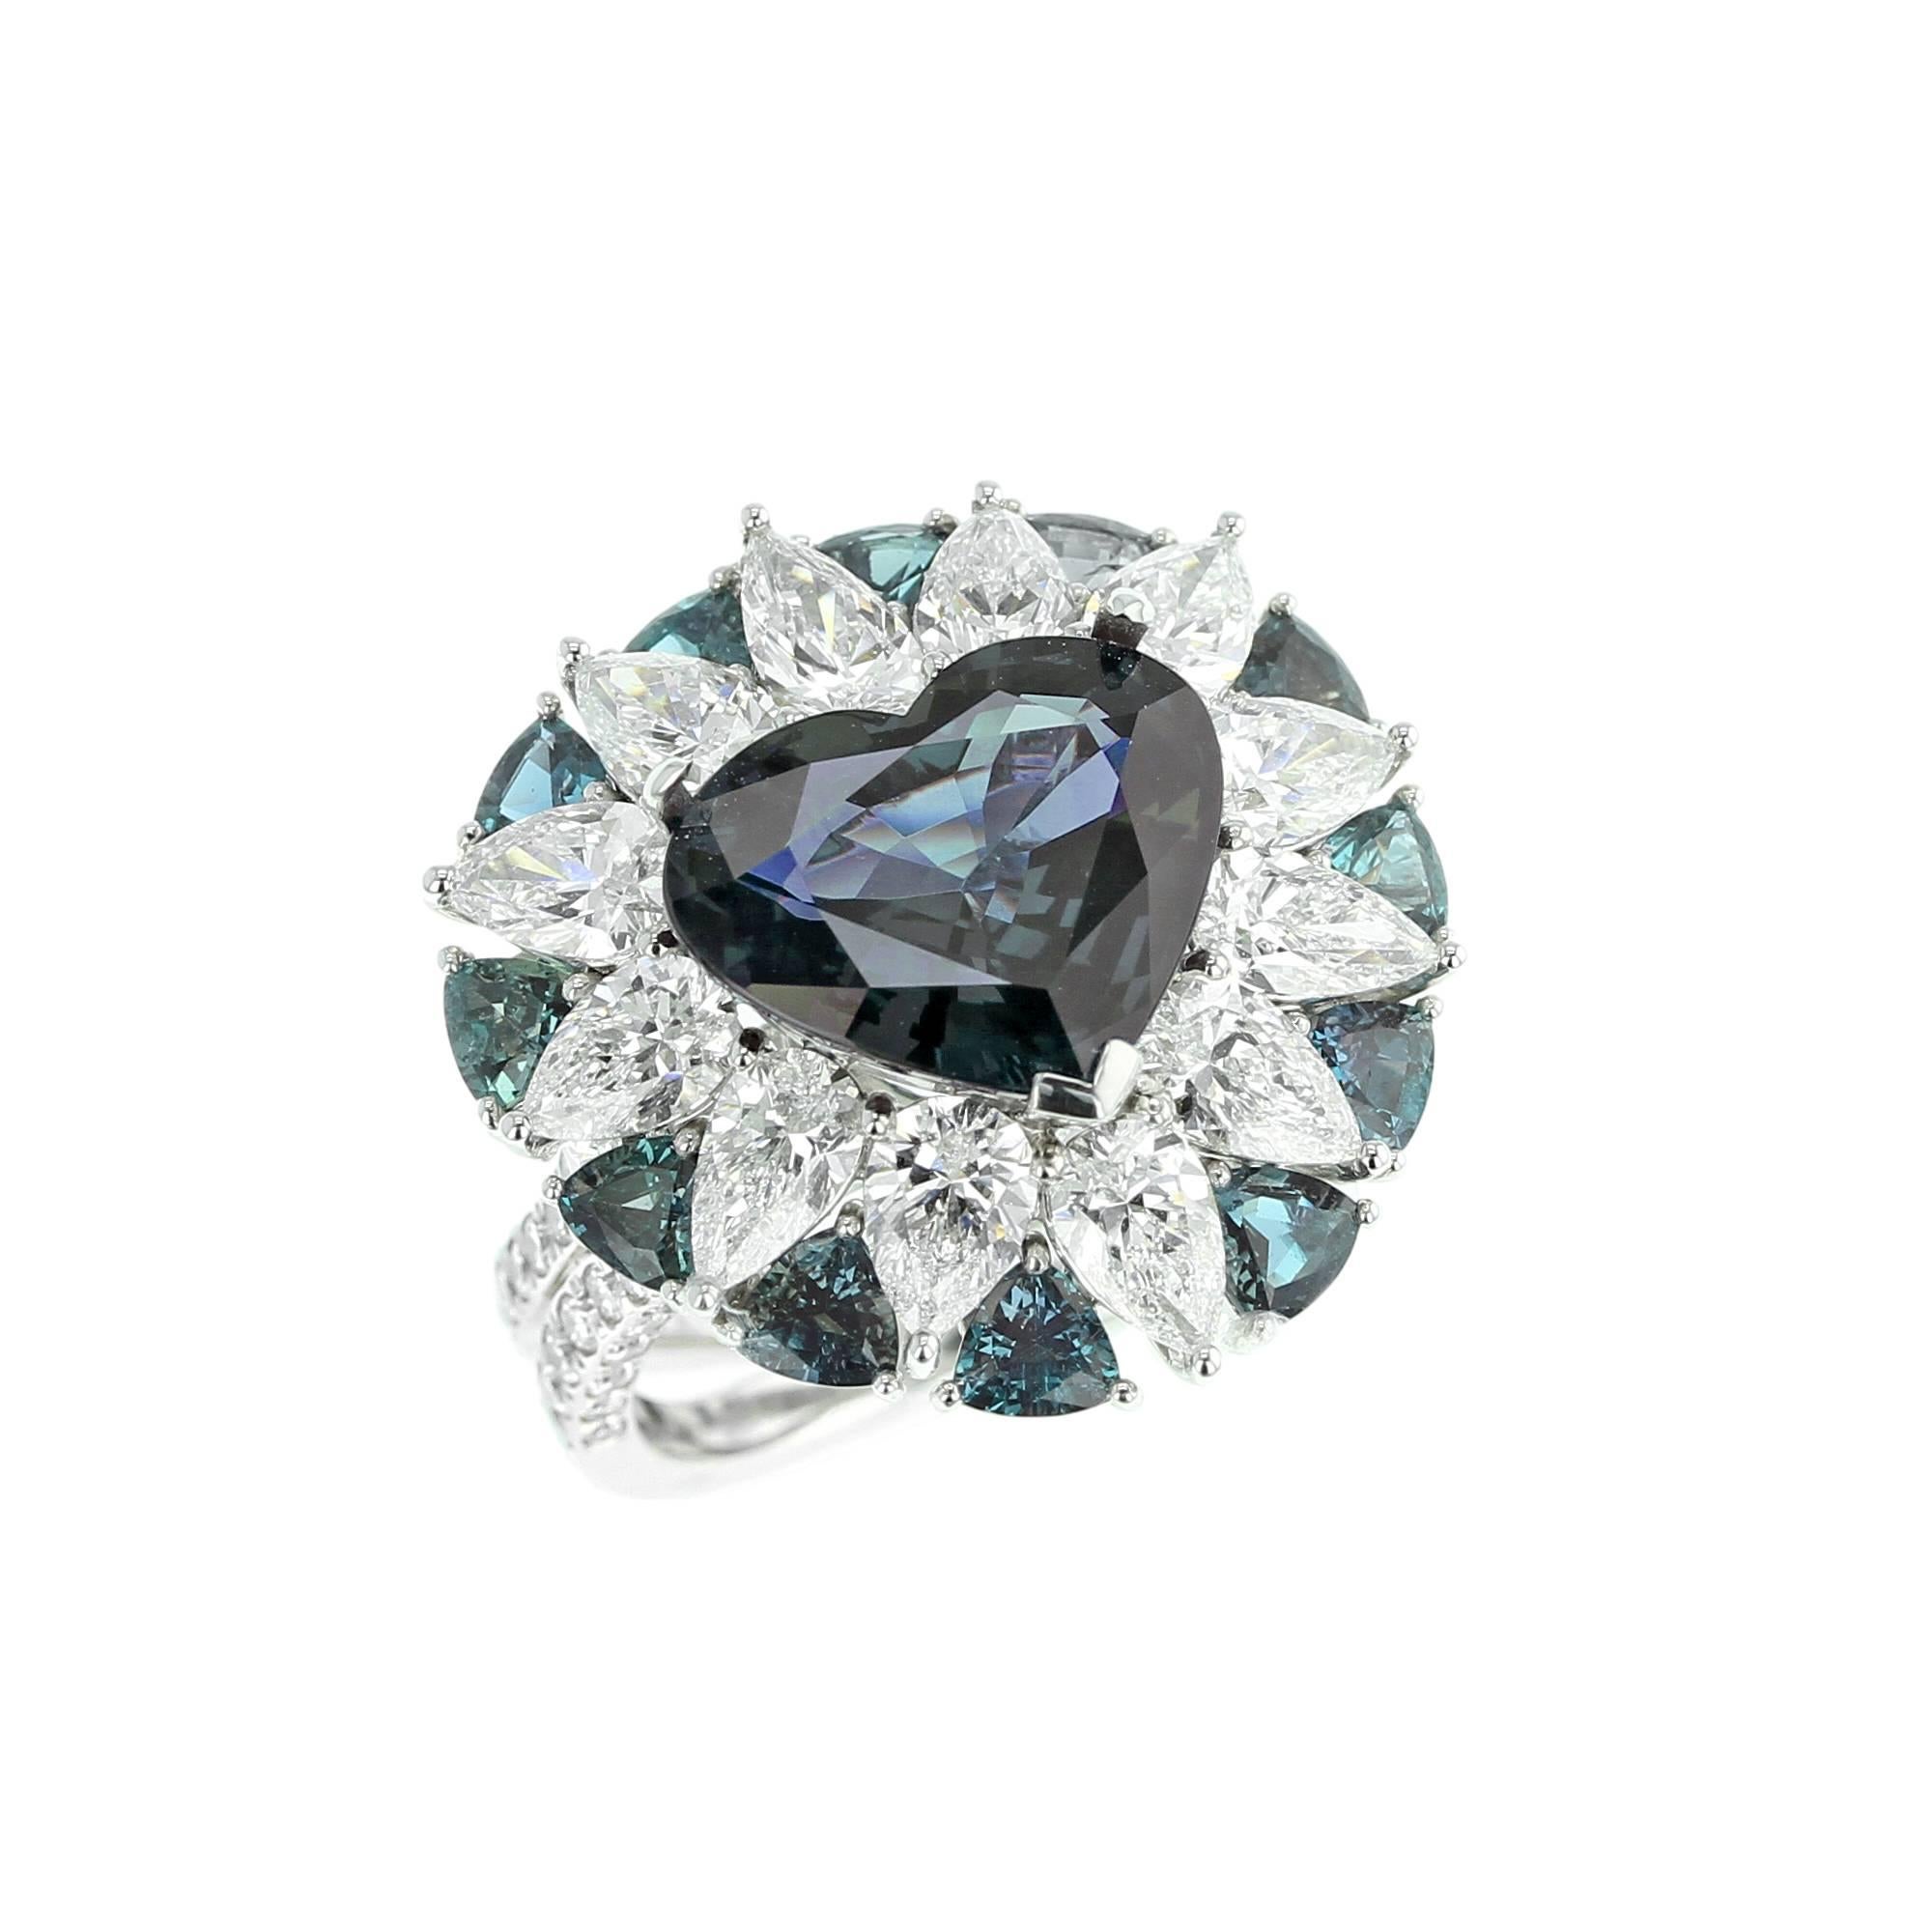 An impressive and beautiful natural, heart-shaped Alexandrite from Brazil, weighing over six carats, accented with diamonds weighing appx. 5.6 cts. (E-F Color, VS Clarity) and alexandrites weighing appx. 2.10 cts., set in Platinum. The Alexandrite